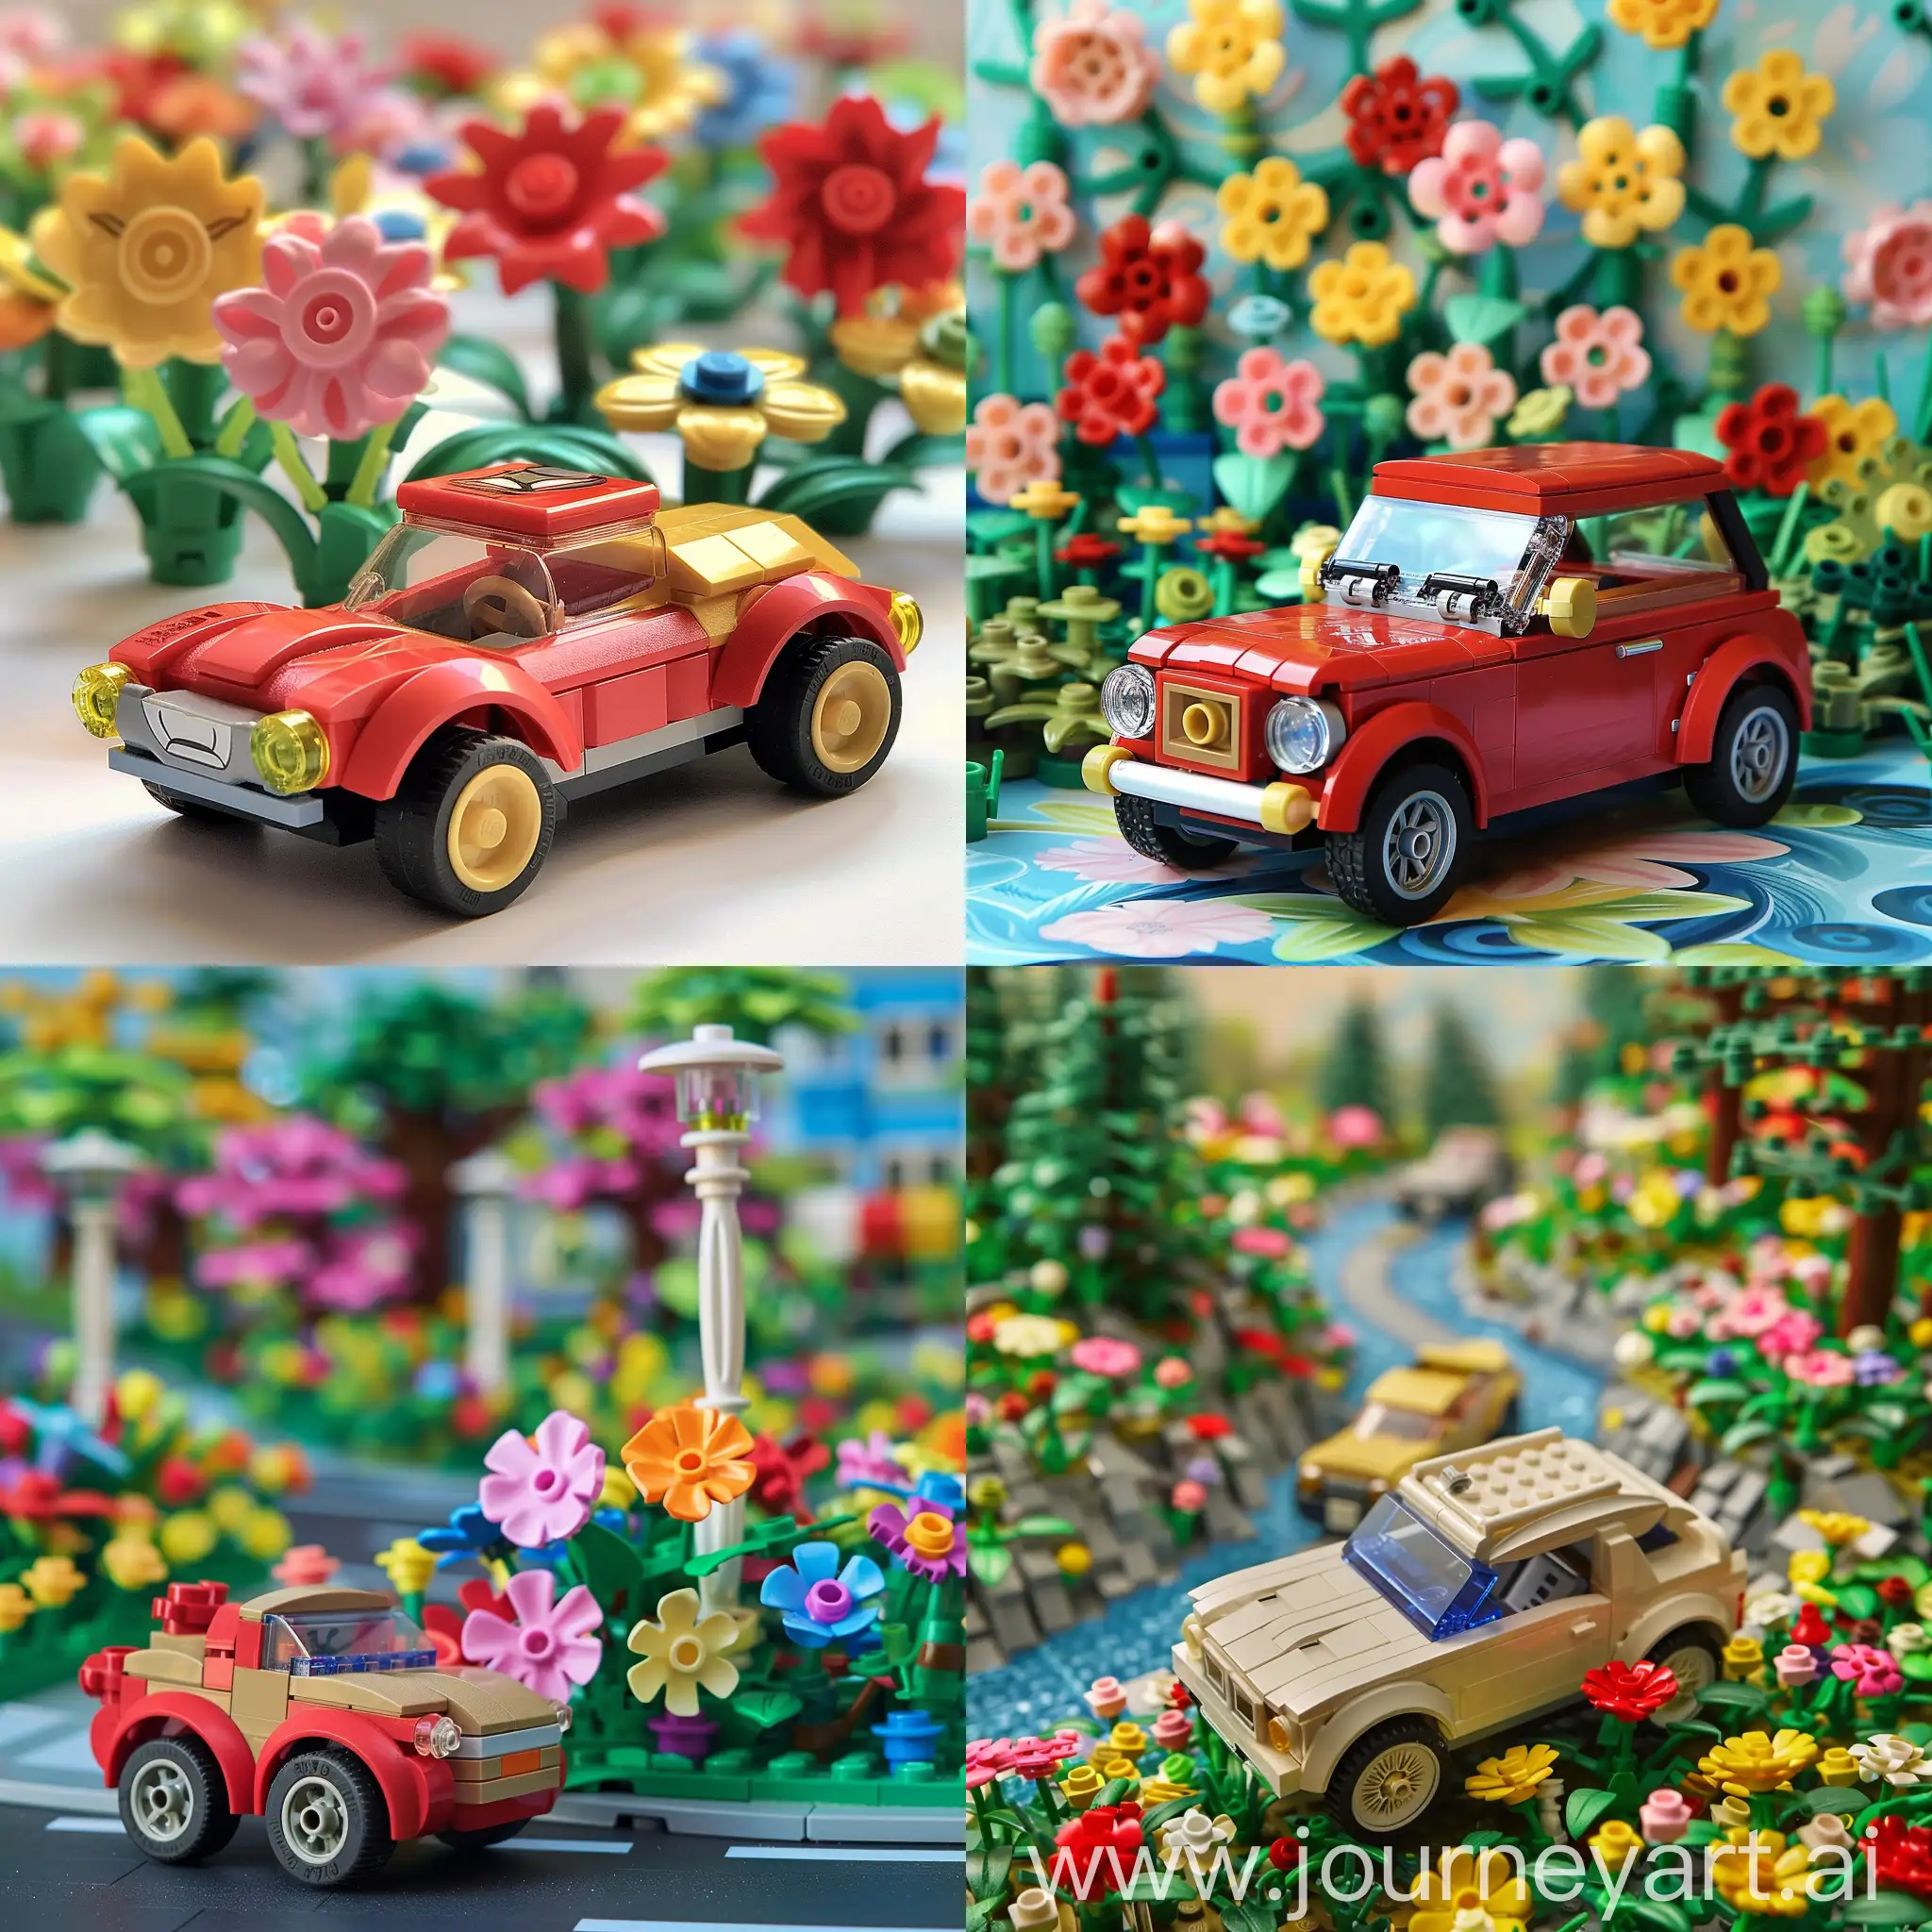 Vibrant-Lego-Floral-and-Car-Creations-Stunning-Instagram-Showcase